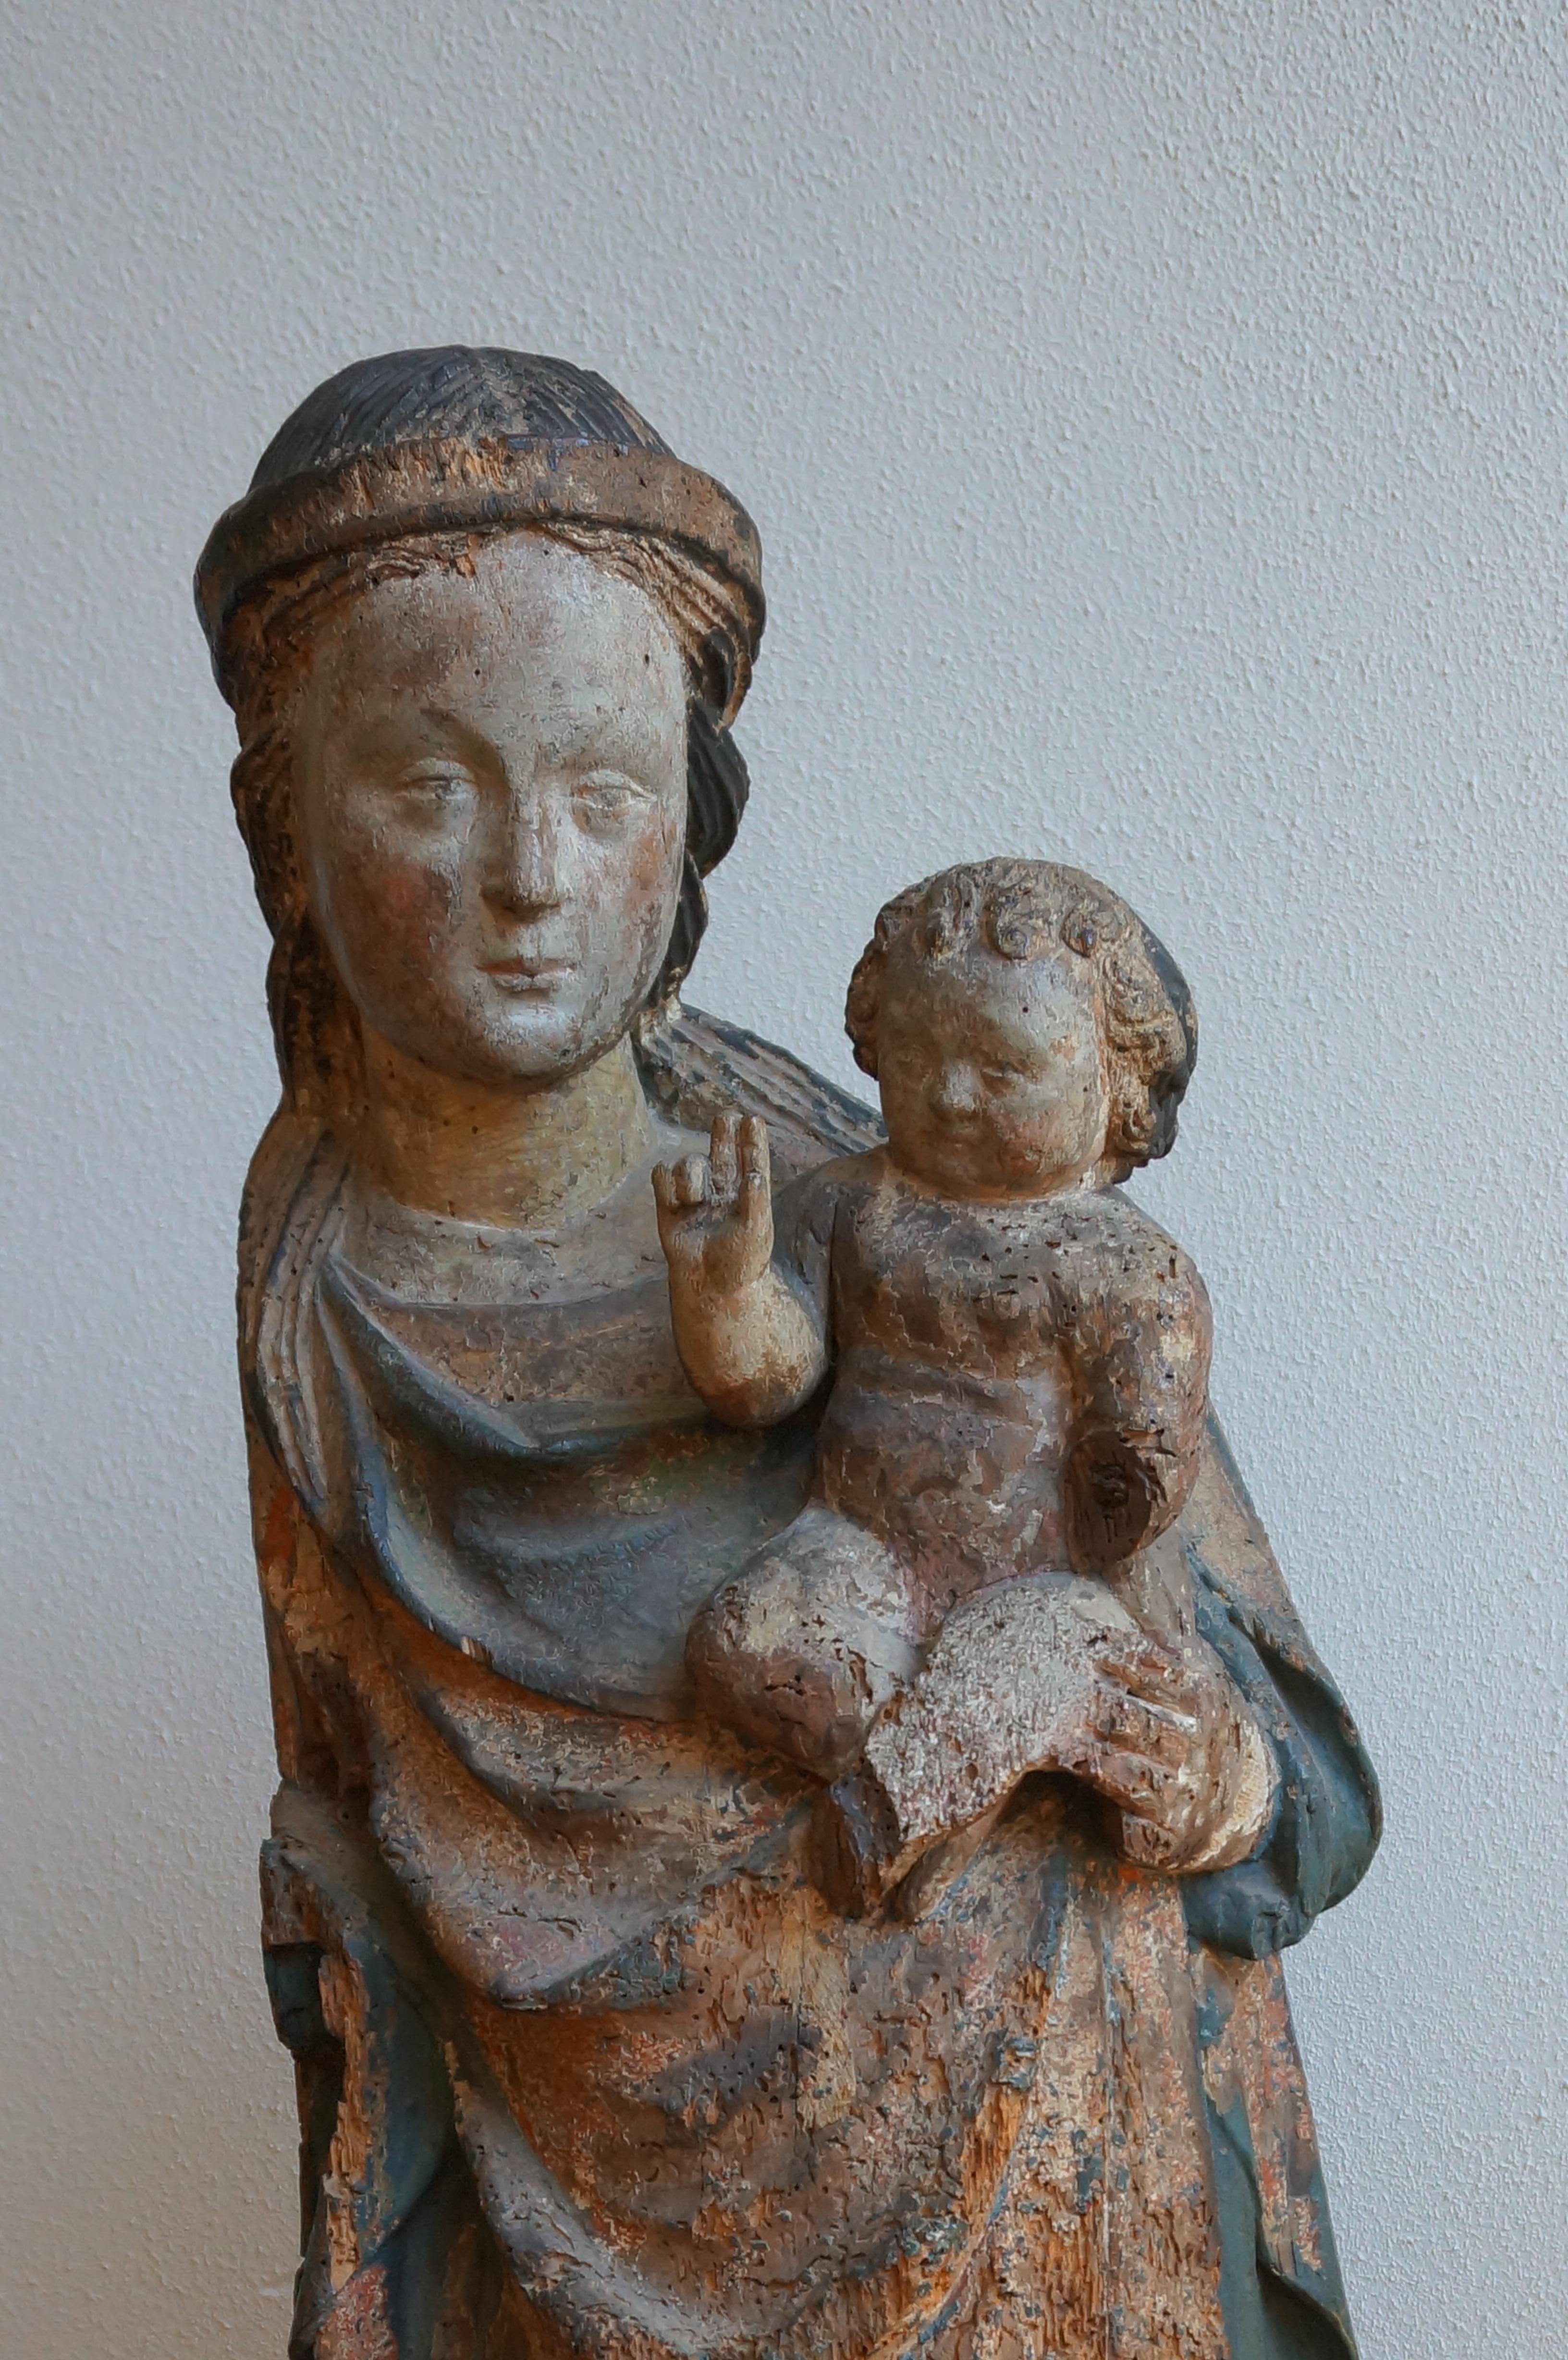 Medieval sculpture of the virgin Mary with the child Jesus, Northern France, early Gothic period.

Mary wears a hairband and has an internalized look. The Jesus child has a comparatively large head to express his wisdom. Mary’s hair arrangement is